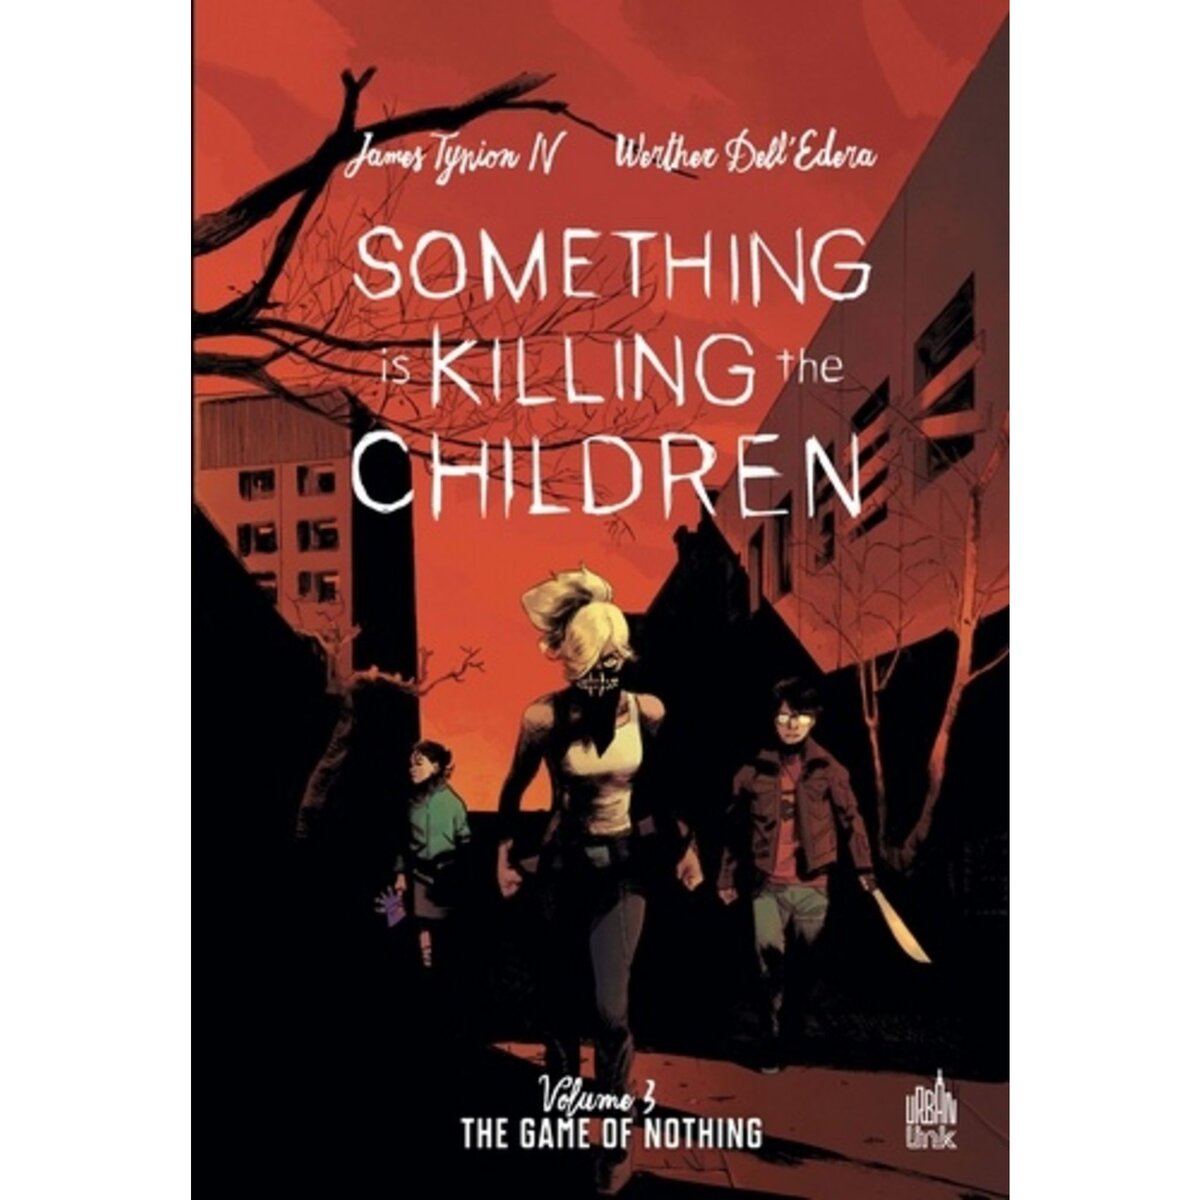  SOMETHING IS KILLING THE CHILDREN TOME 3 : THE GAME OF NOTHING, Tynion IV James